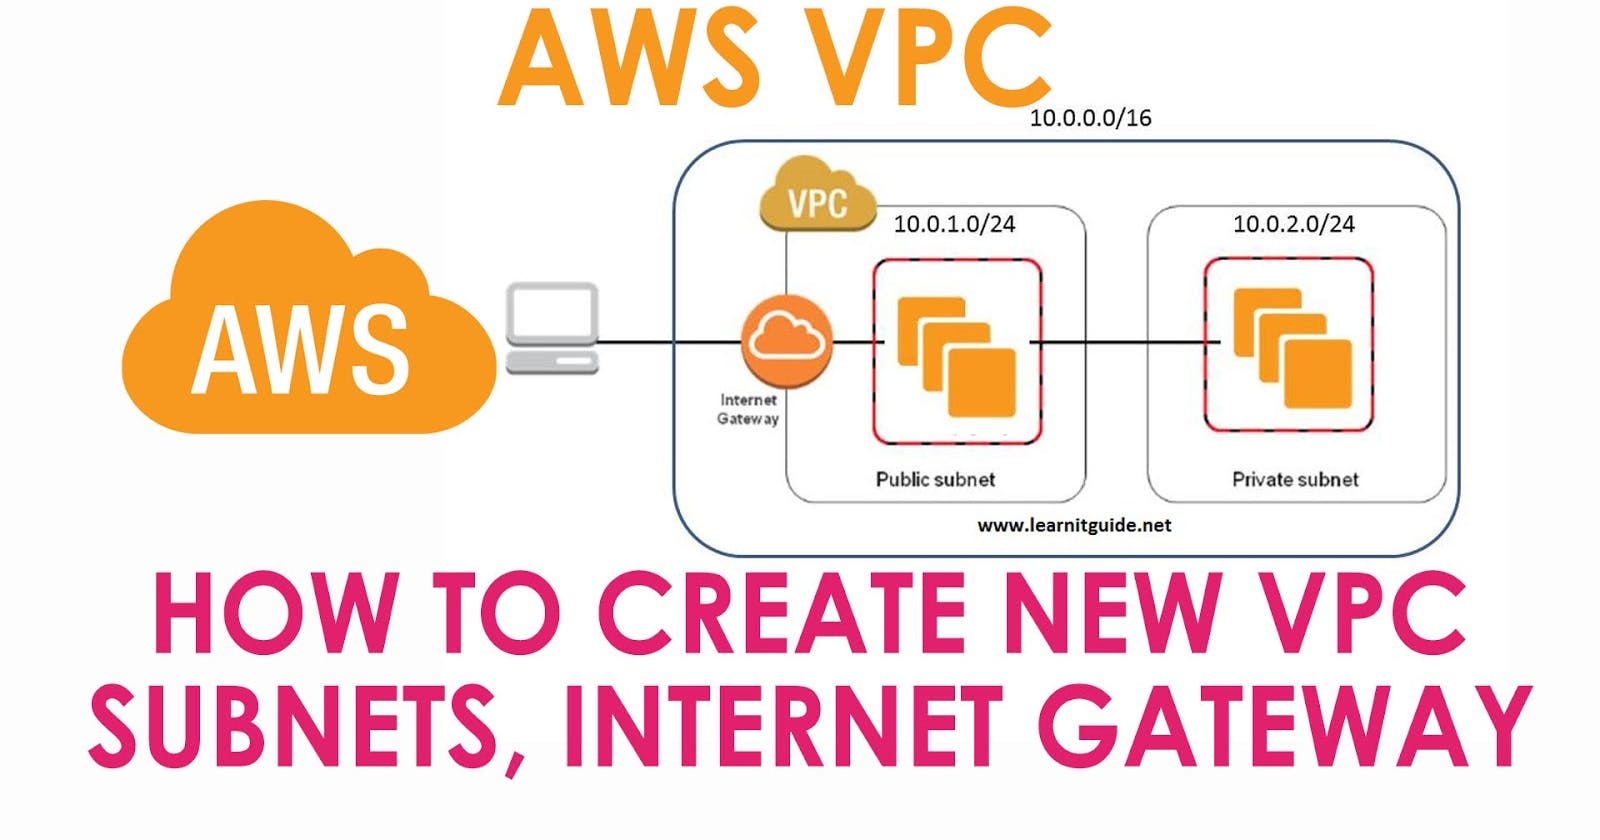 Creating a VPC instance in AWS